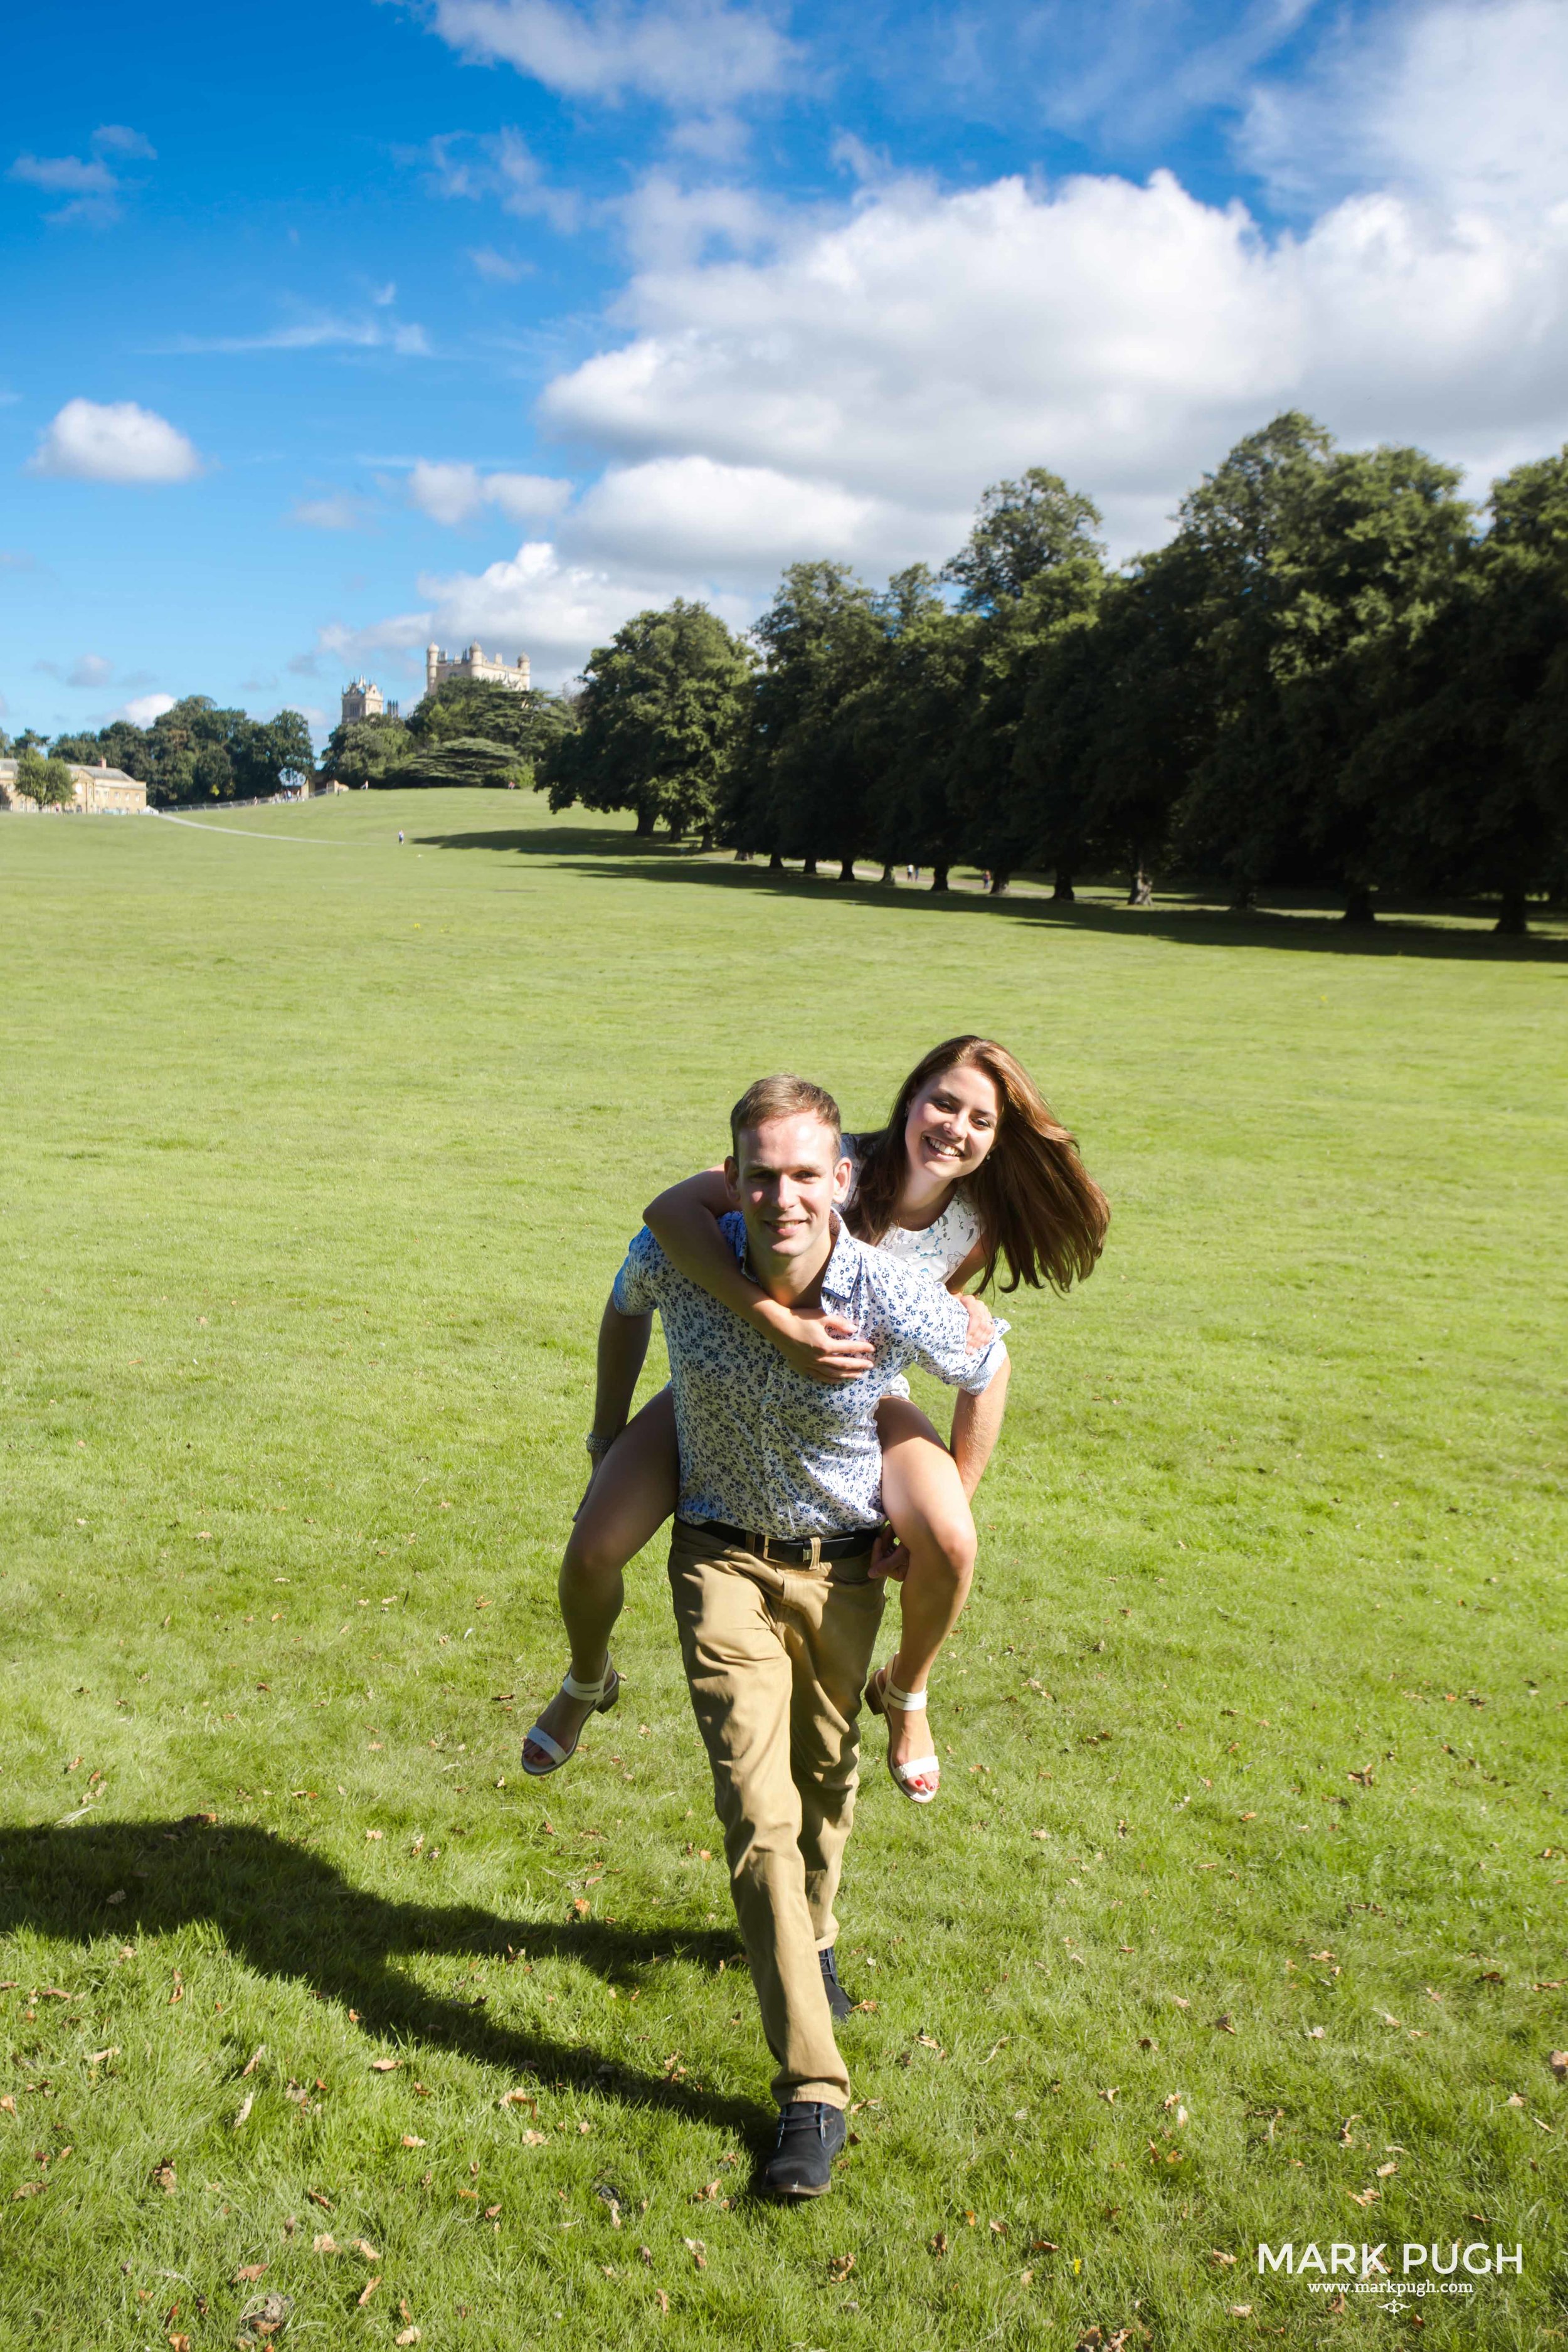 016 - Adriana and James - fineART preWED Photography at Wollaton Hall in Nottingham by www.markpugh.com Mark Pugh of www.mpmedia.co.uk_.JPG